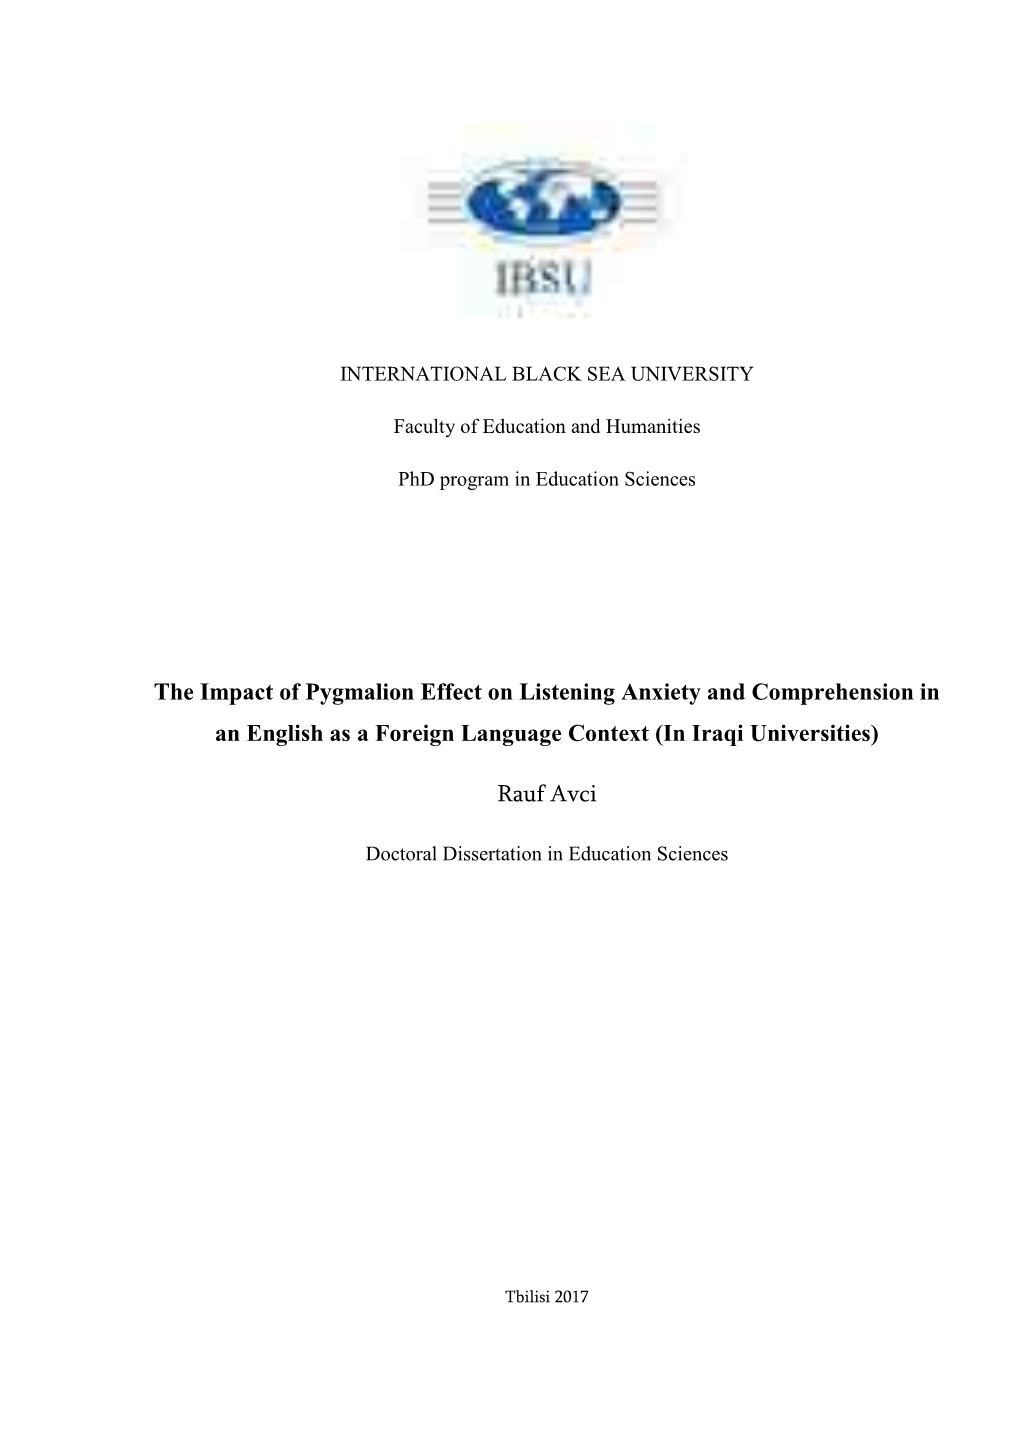 The Impact of Pygmalion Effect on Listening Anxiety and Comprehension in an English As a Foreign Language Context (In Iraqi Universities)